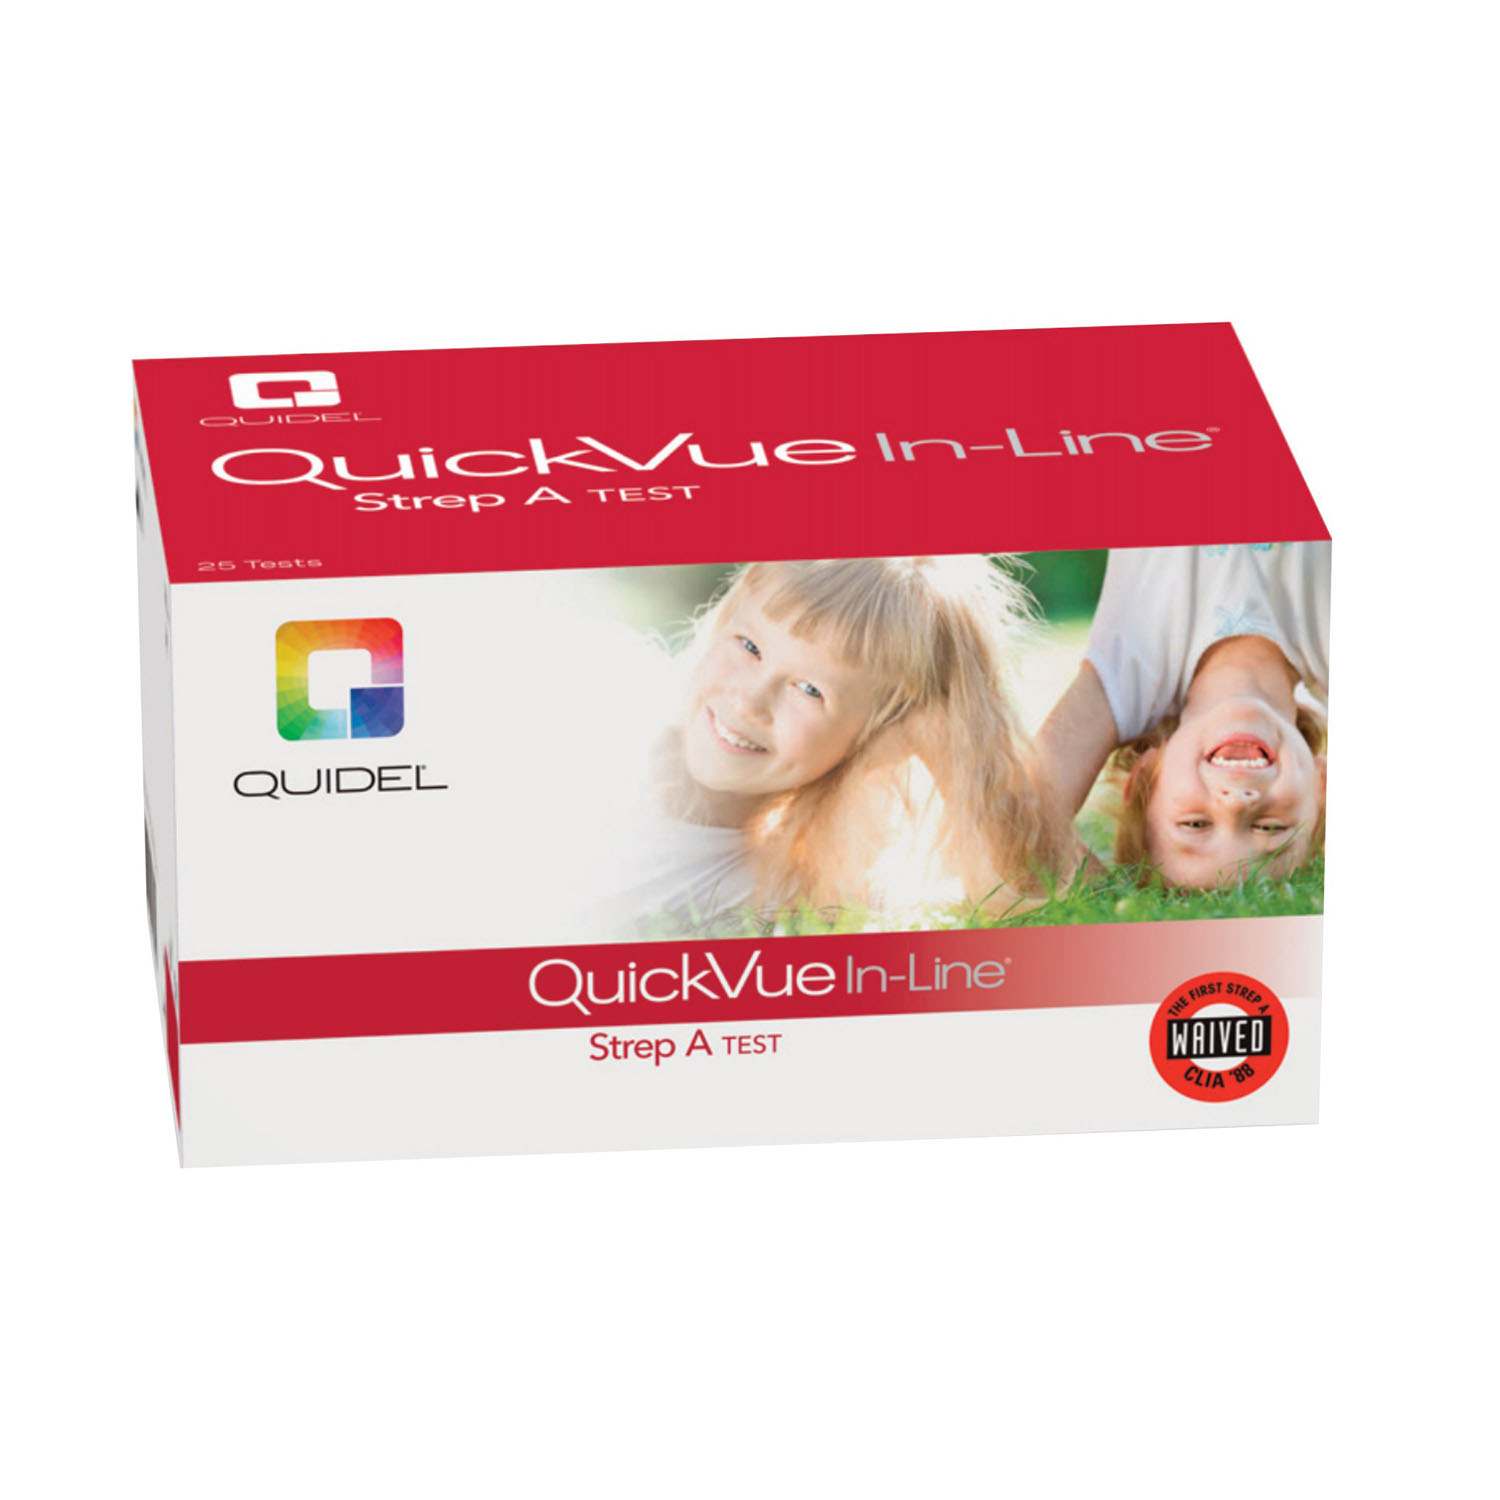 QUIDEL QUICKVUE IN-LINE STREP A KIT : 0343 KT $102.22 Stocked